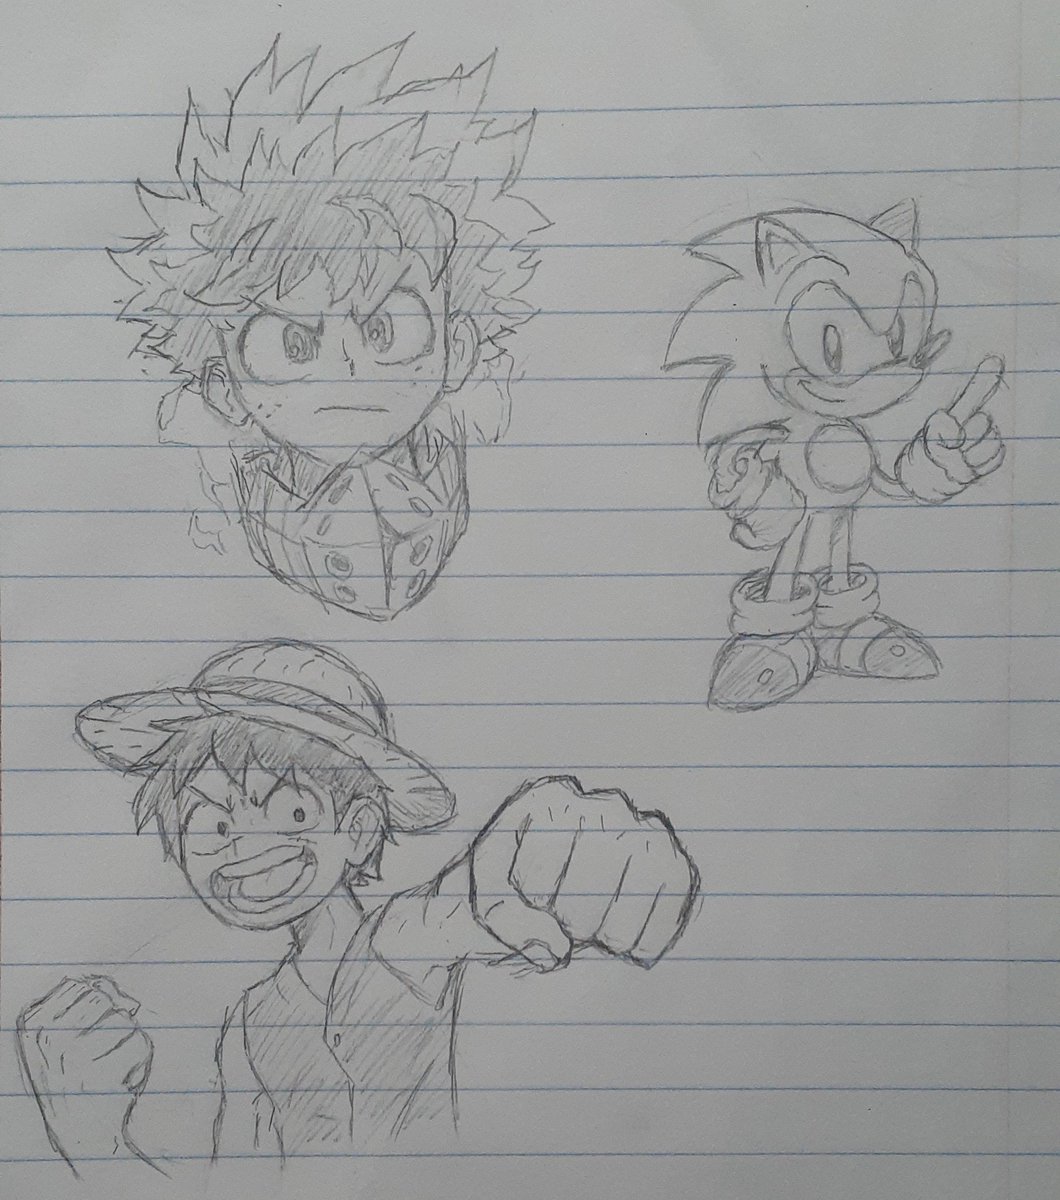 Doodles from saturday school today, I'm slowly getting better at drawing on paper again 